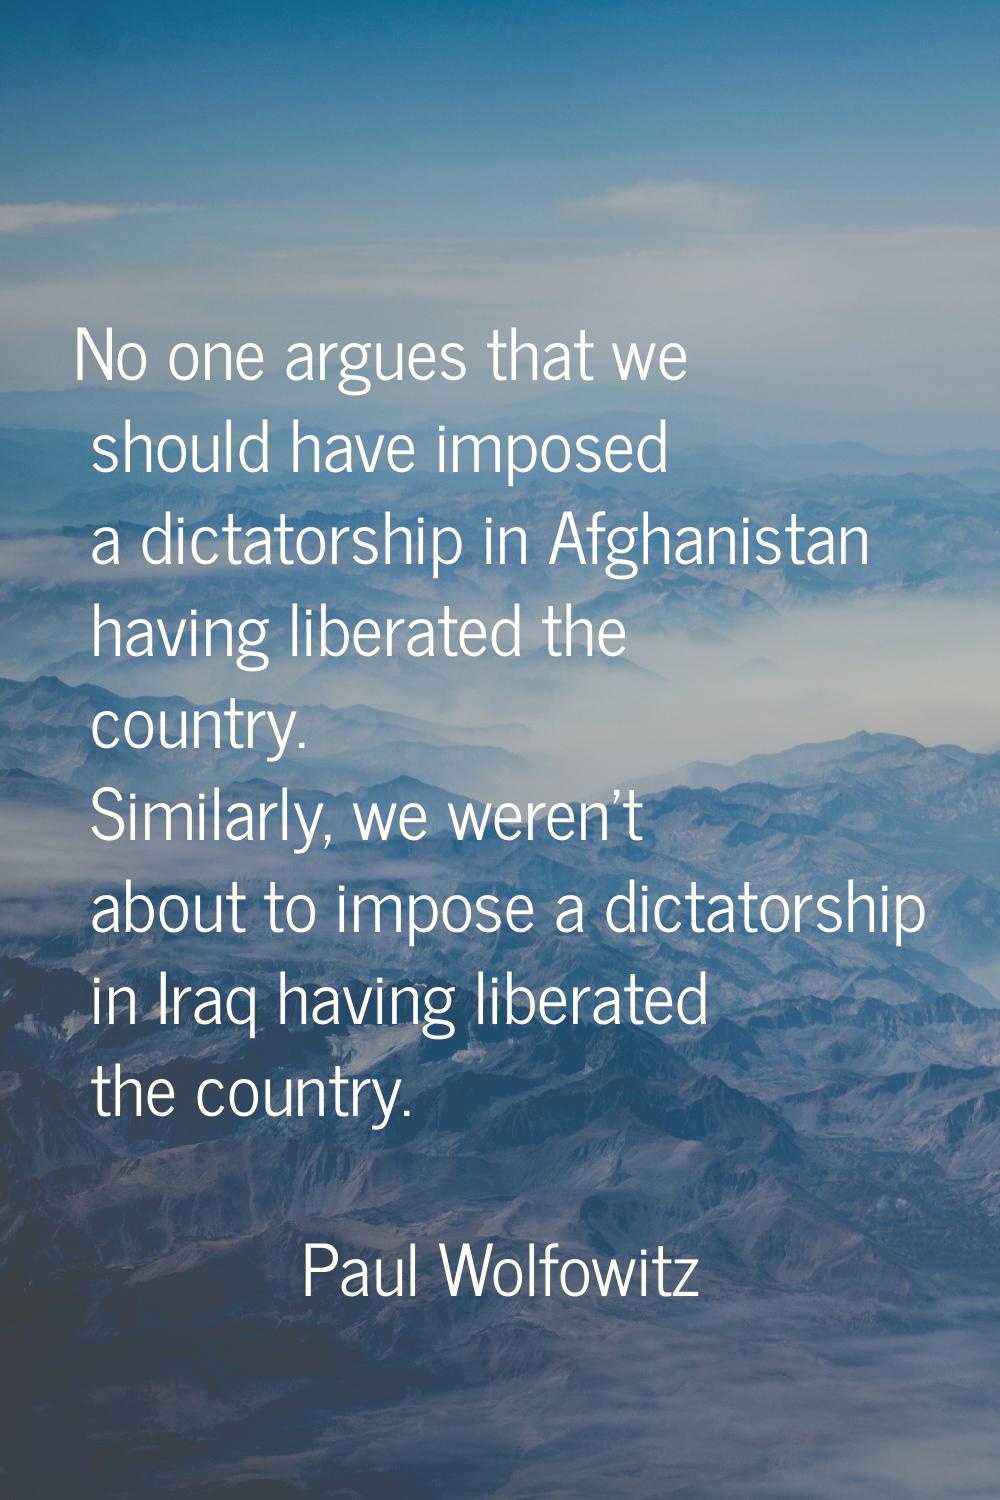 No one argues that we should have imposed a dictatorship in Afghanistan having liberated the countr